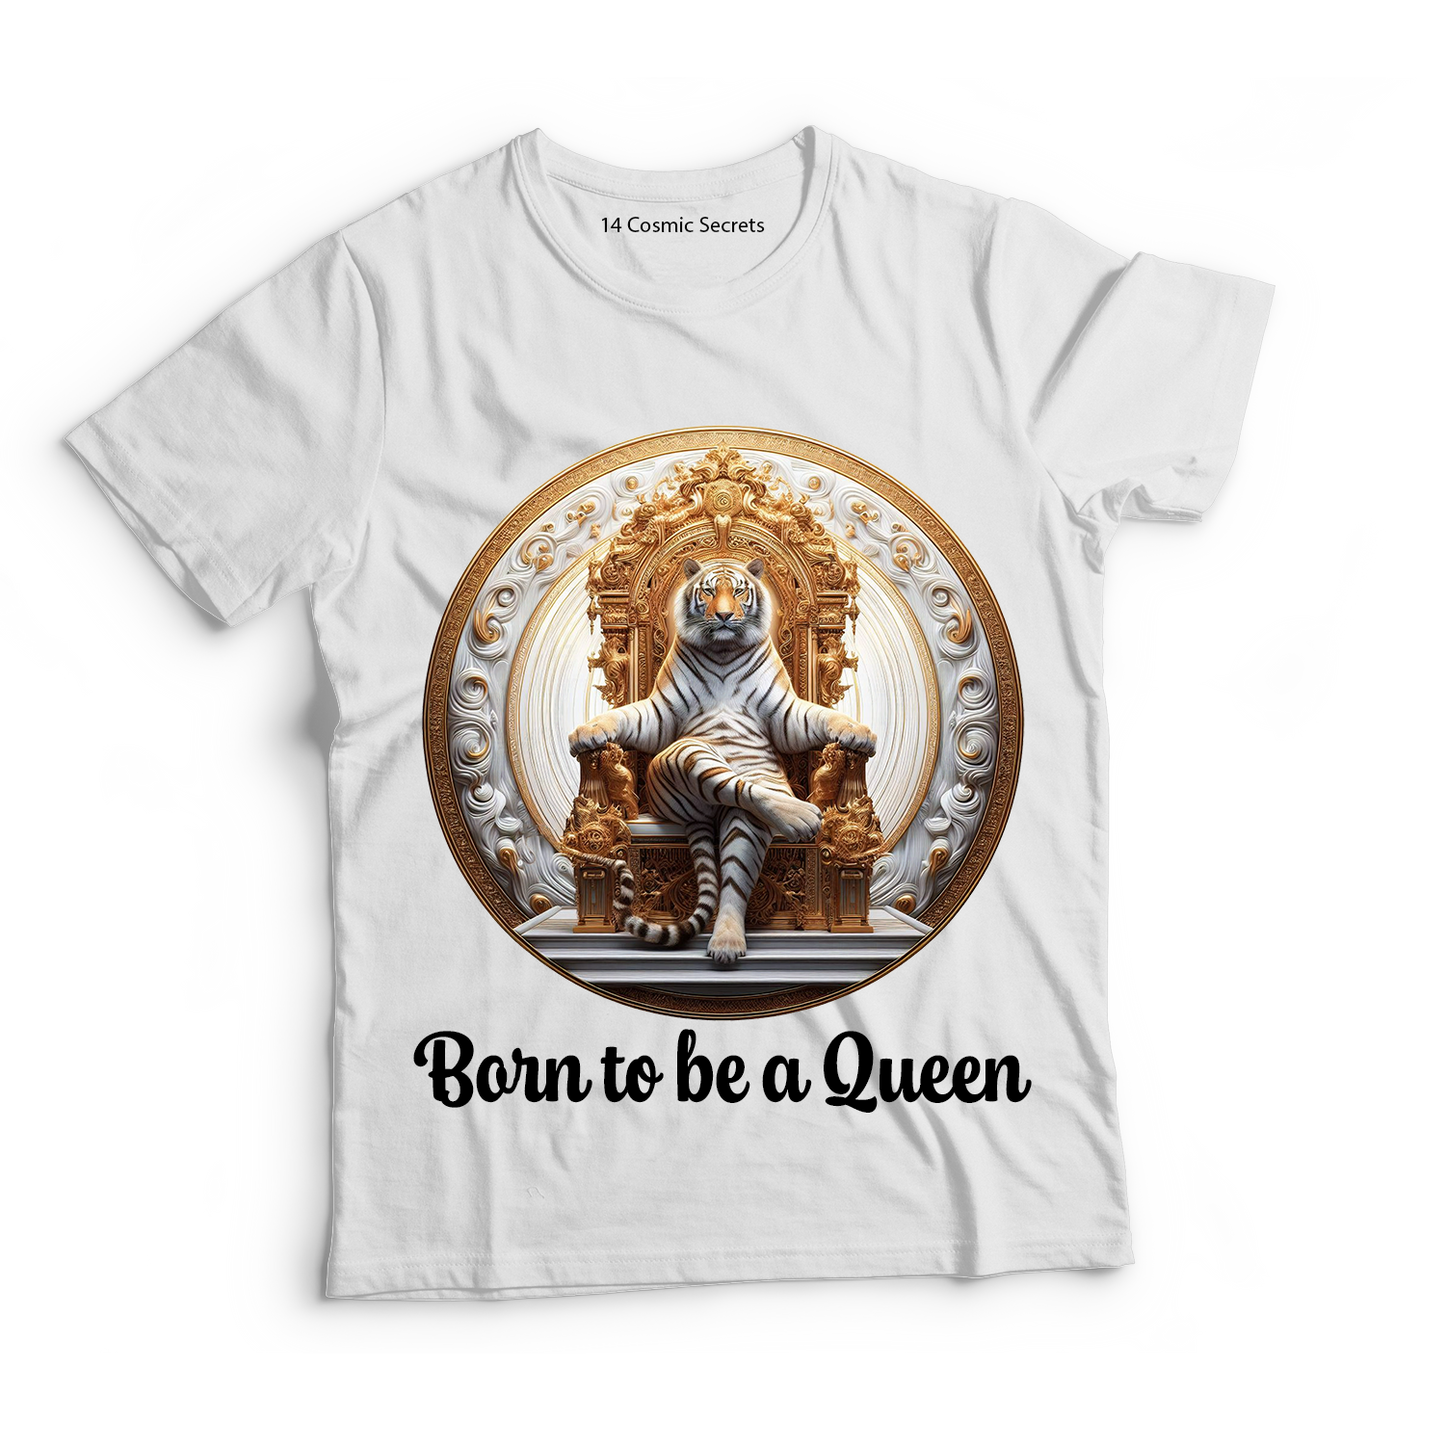 Bengal King of the Jungle Graphic Printed T-Shirt  Cotton T-Shirt Magnificence of India T-Shirt